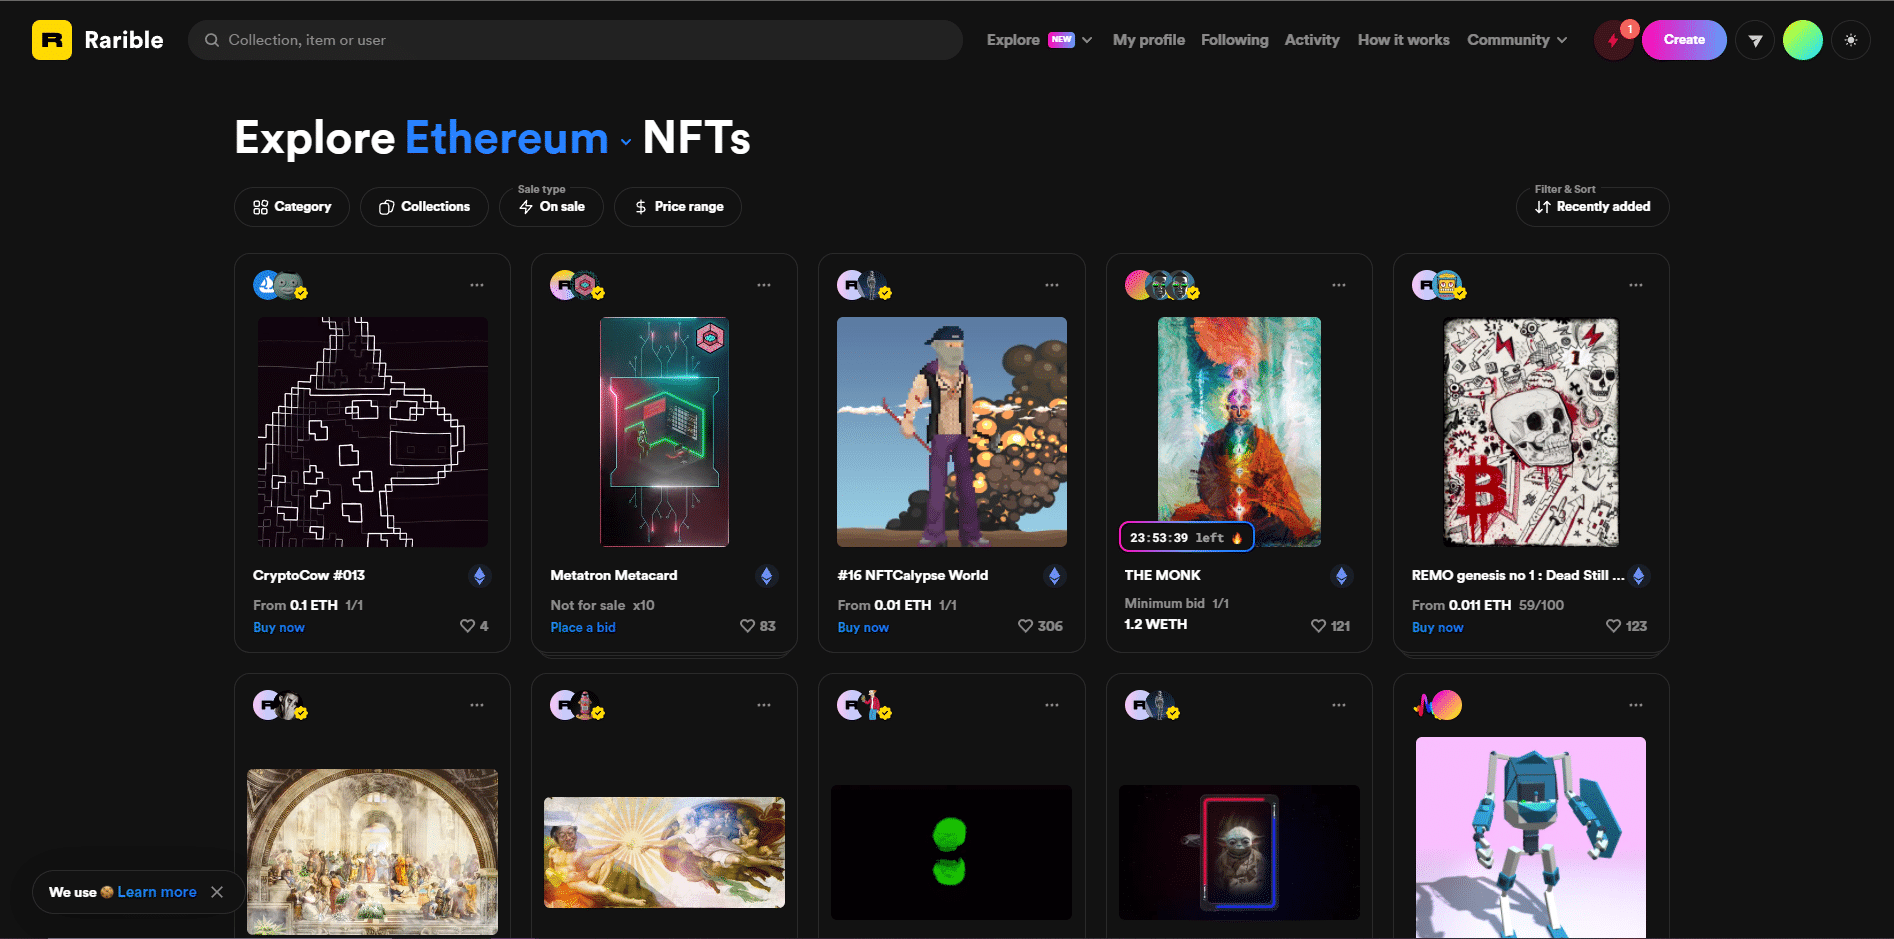 How to buy NFT tokens